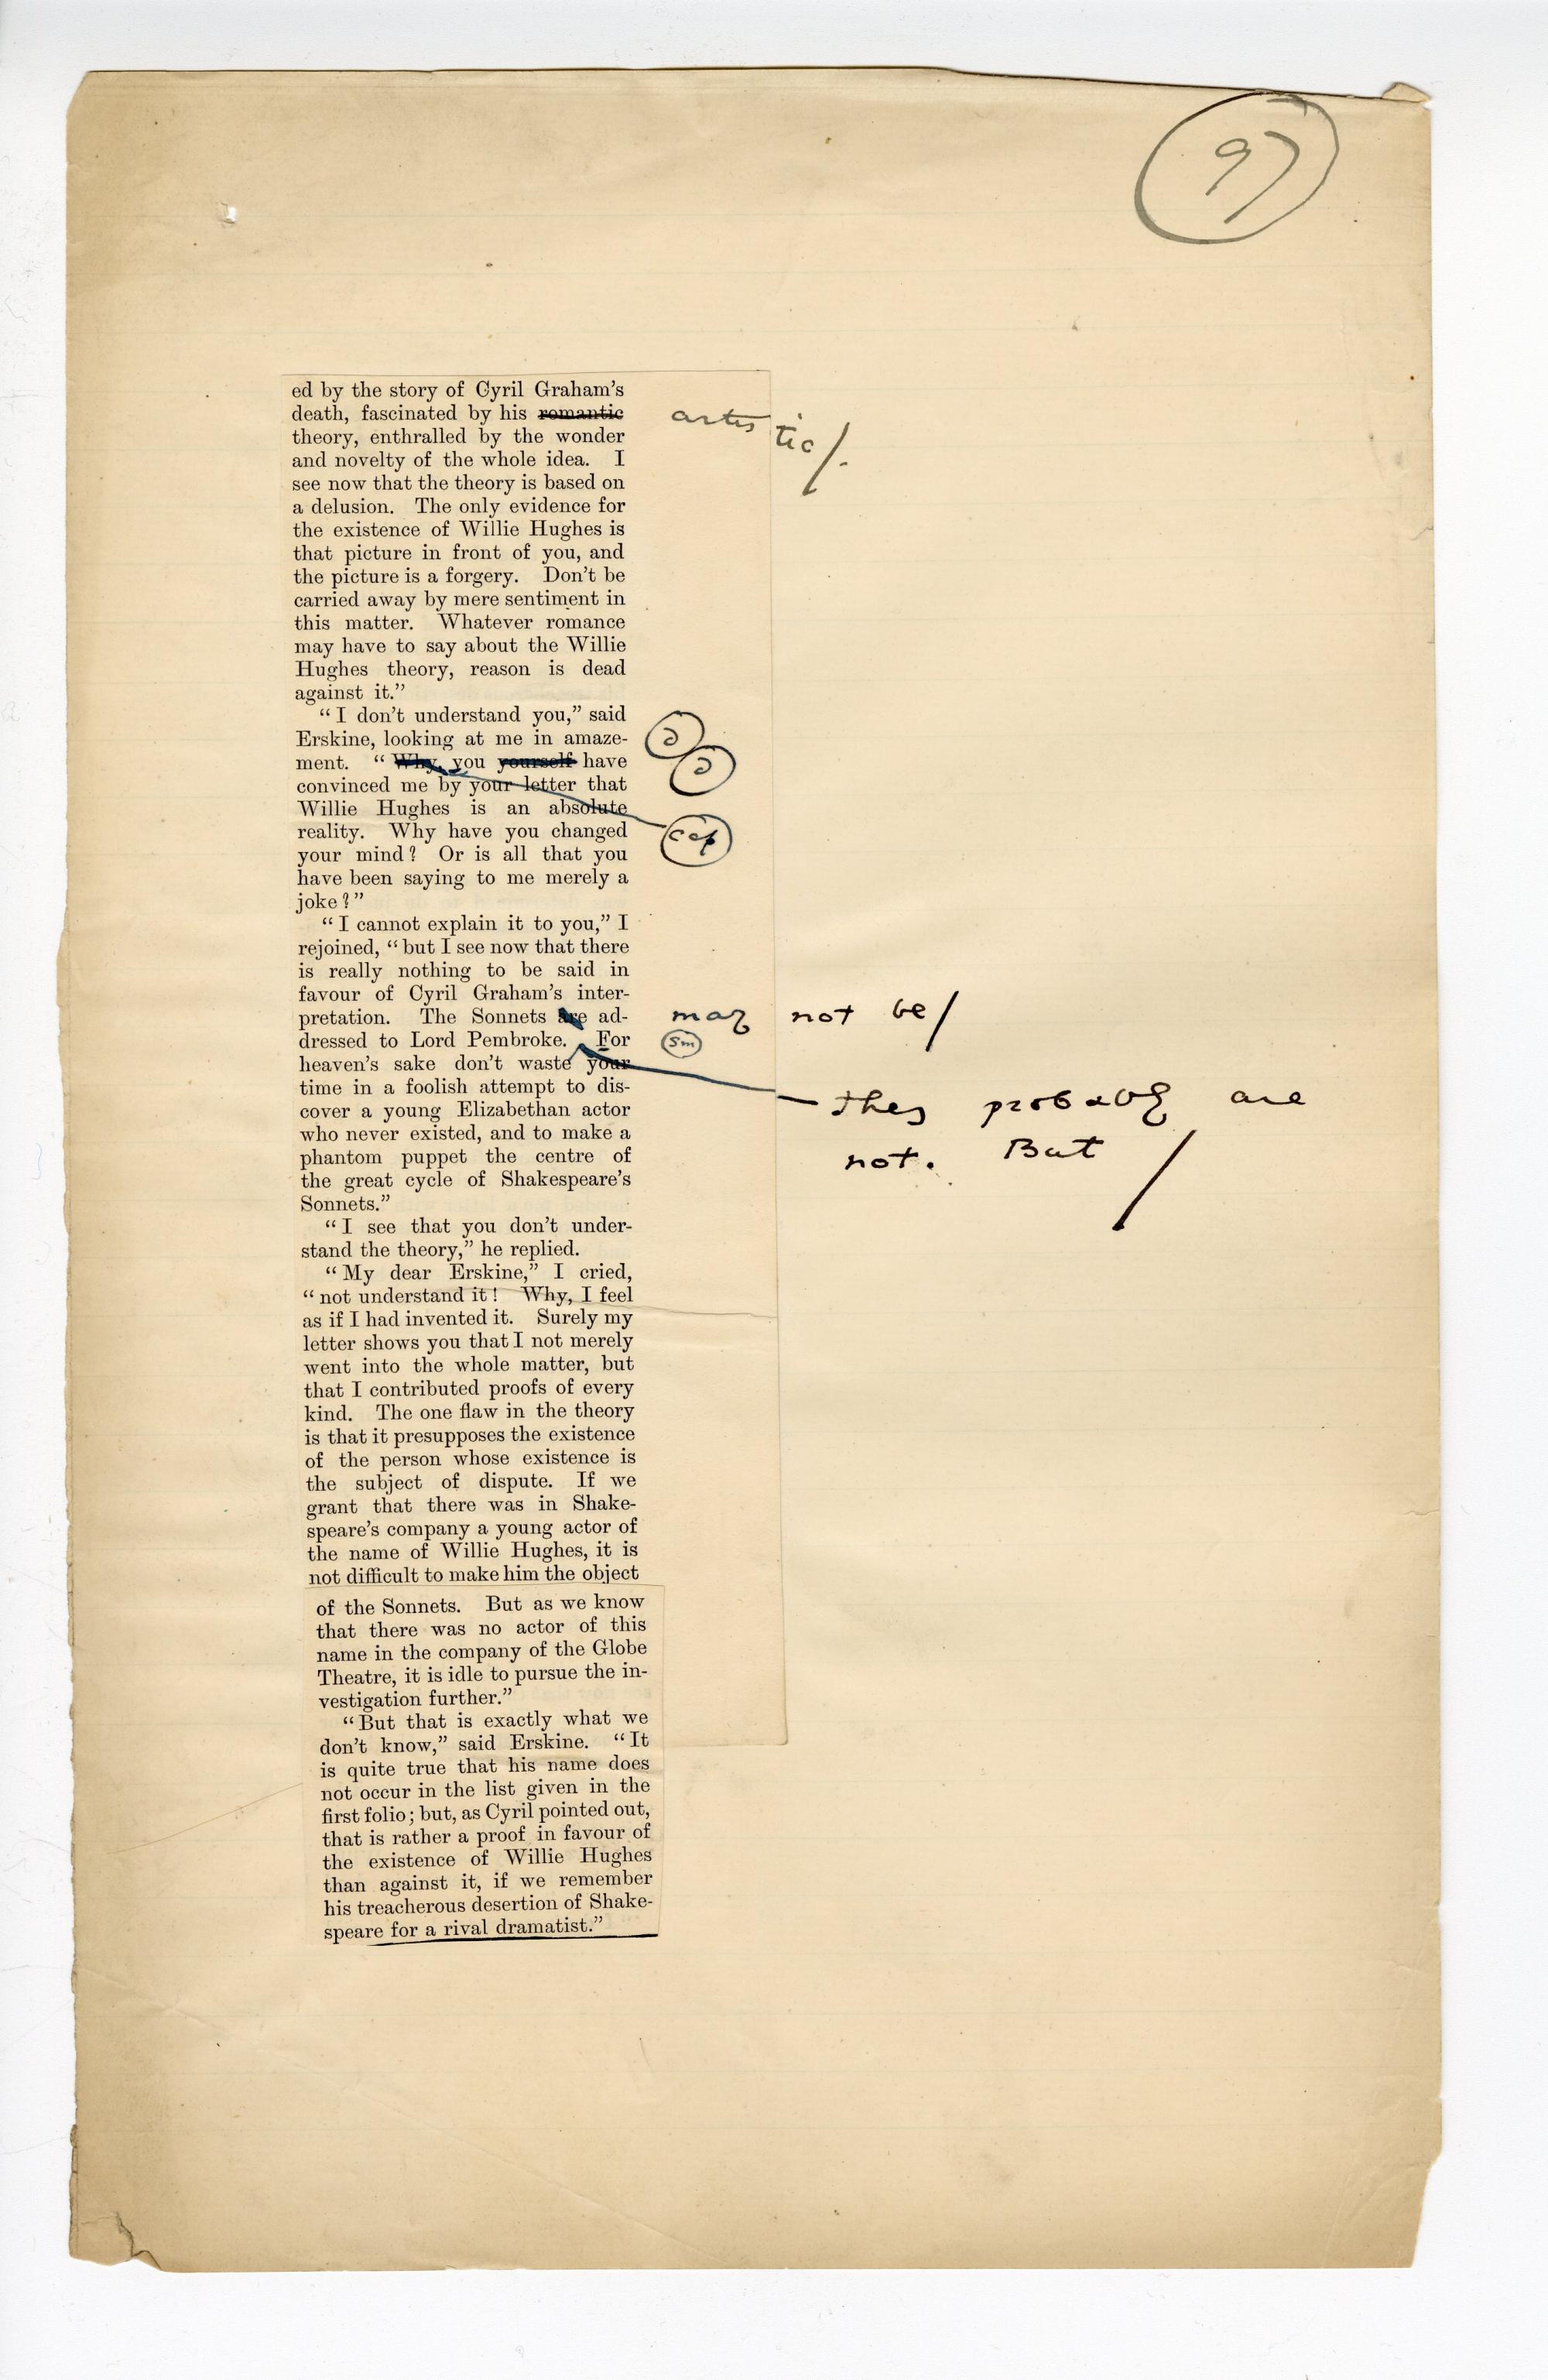 Folio 97 contains two cutouts from the Blackwood's 1889 printing glued down into a single column onto a notebook page and annotated on the cutout and onto the notebookpage. The first cutout is from the righthand column of p.19. The second cutout, which is glued directly under end of the printed text on the first cutout (but glued over the bottom margin of the page), is from the lefthand column of p.20. 